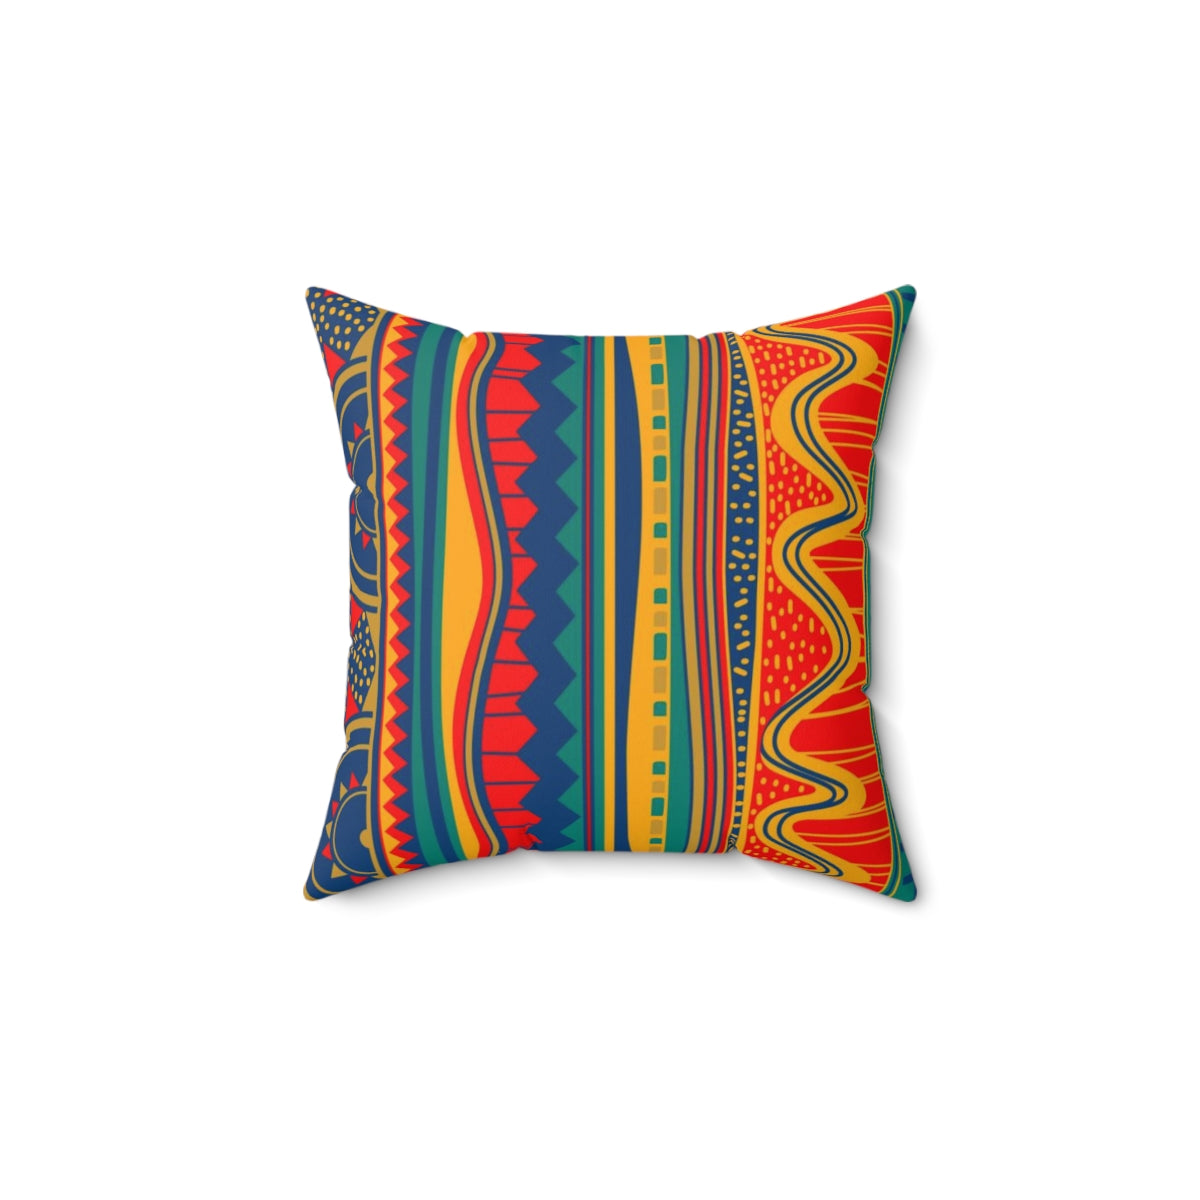 African Print Multi colored Cushion Sleeve